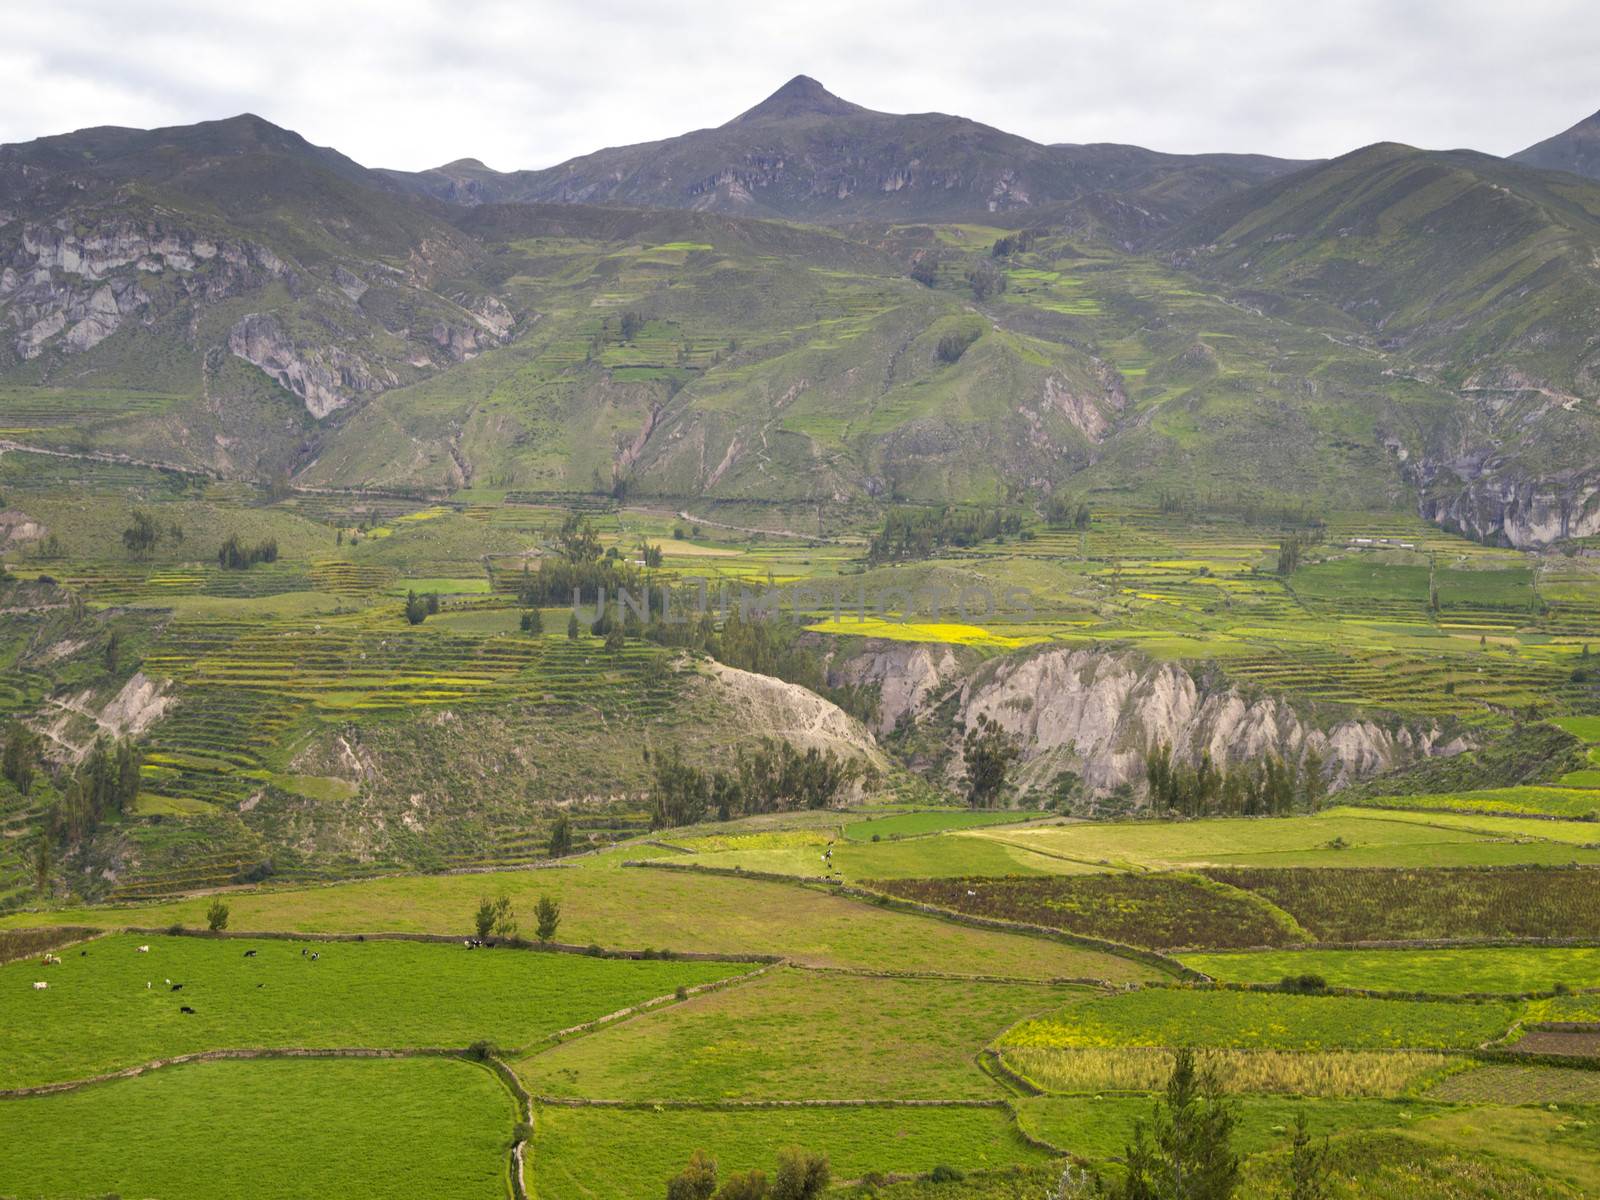 Partial view of the Colca Canyon, Arequipa region, Peru.